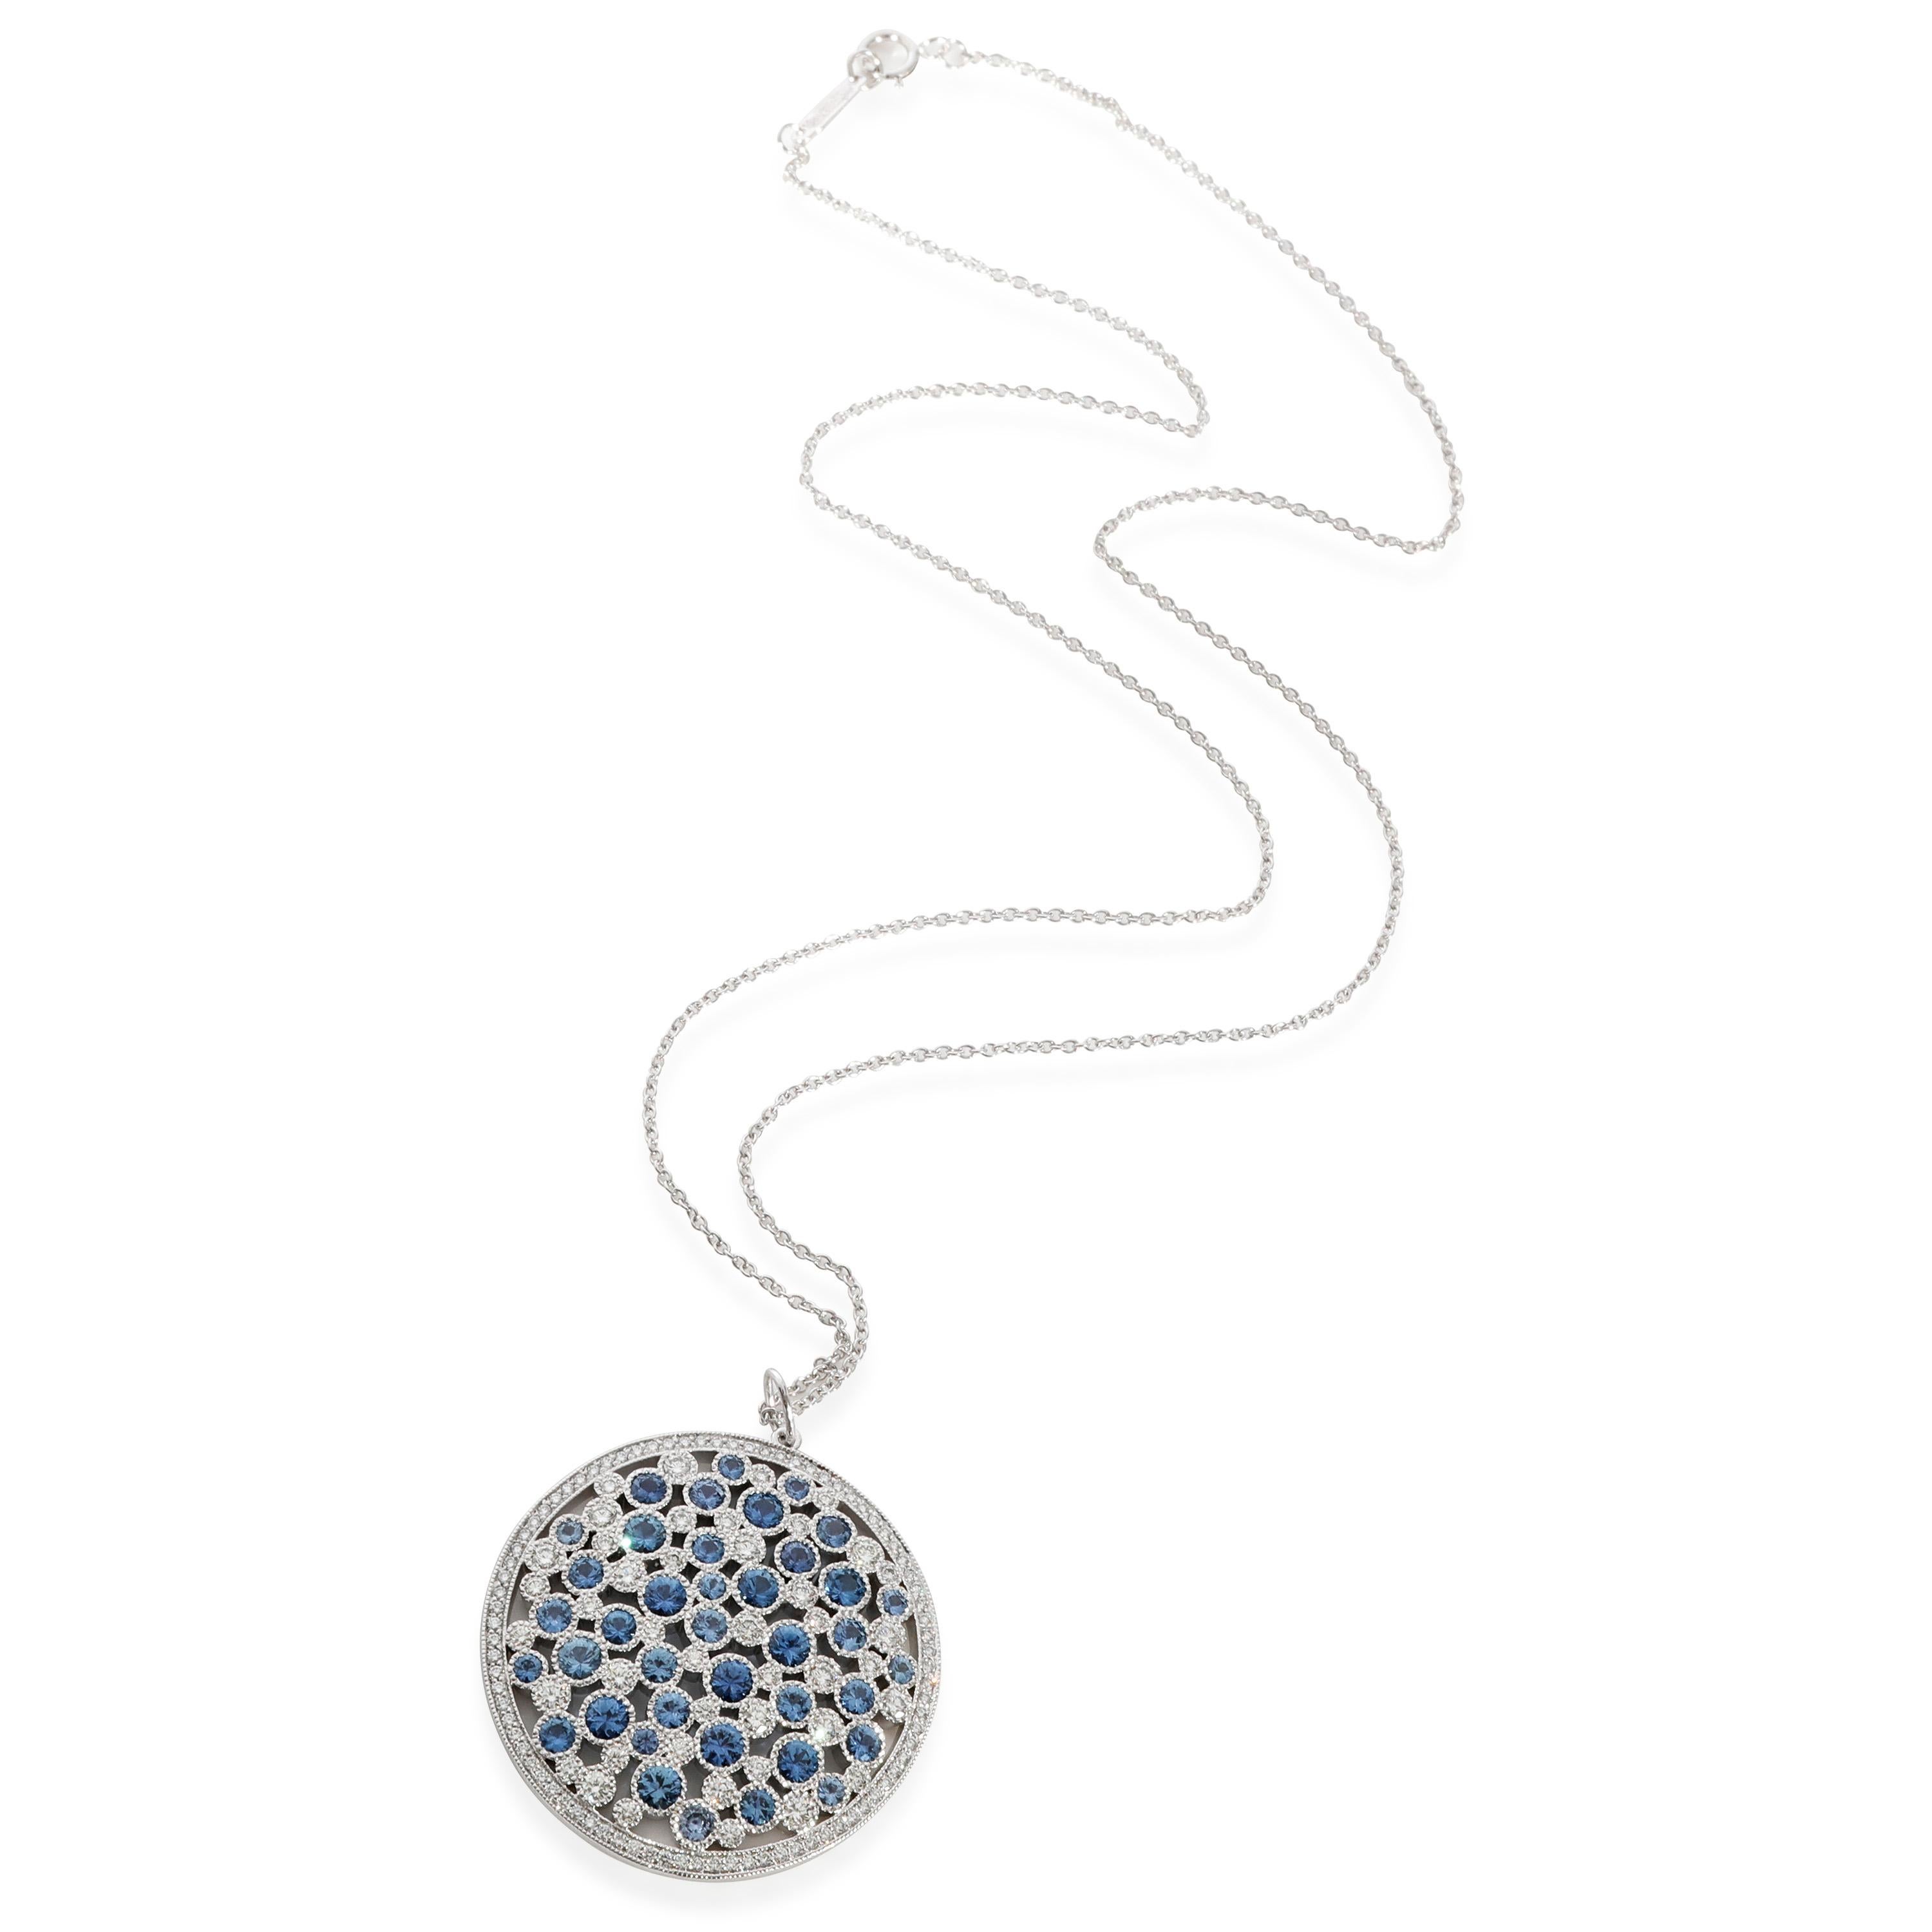 Tiffany & Co. Cobblestone Sapphire Diamond Pendant in  Platinum 0.91 CTW

PRIMARY DETAILS
SKU: 127972
Listing Title: Tiffany & Co. Cobblestone Sapphire Diamond Pendant in  Platinum 0.91 CTW
Condition Description: Retails for 16500 USD. In excellent